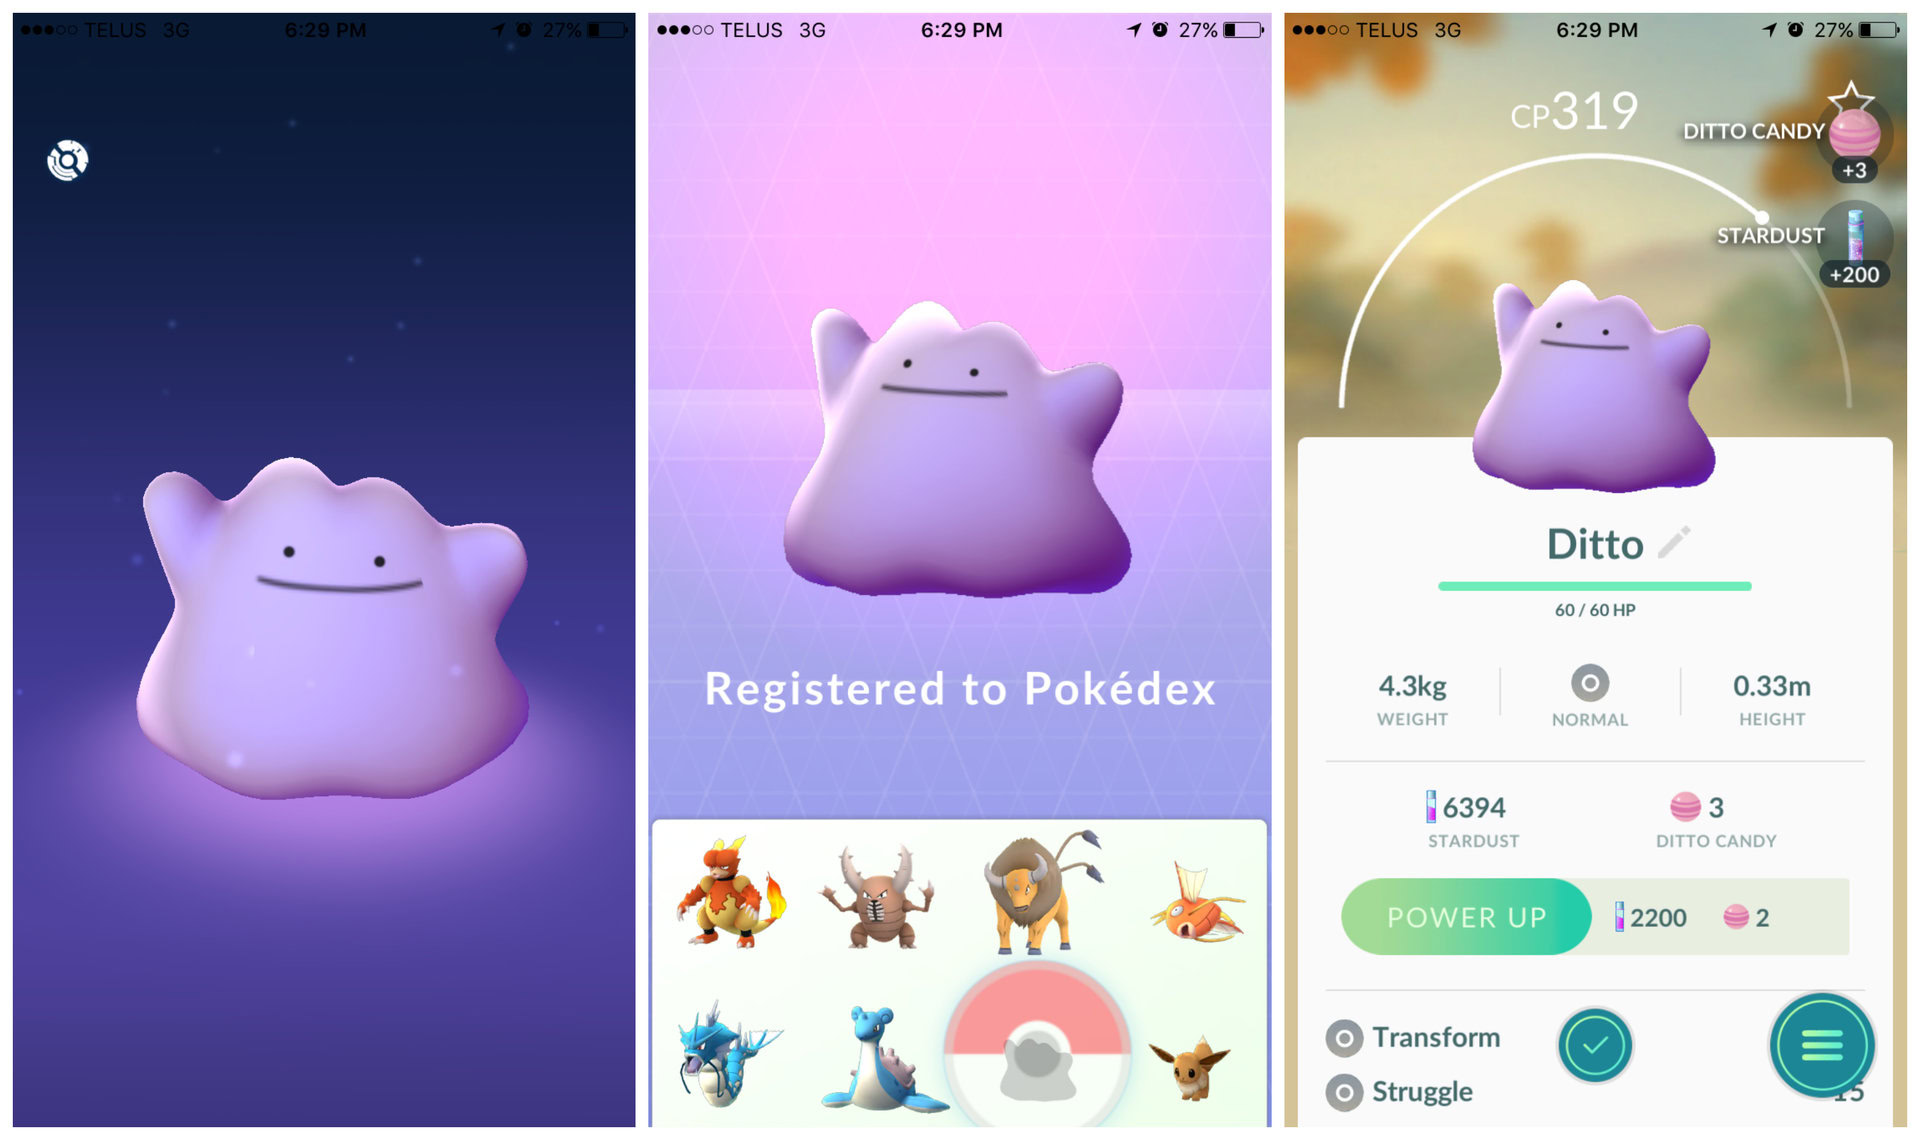 How to catch Ditto in Pokémon Go Gotta get the goo! Android Authority